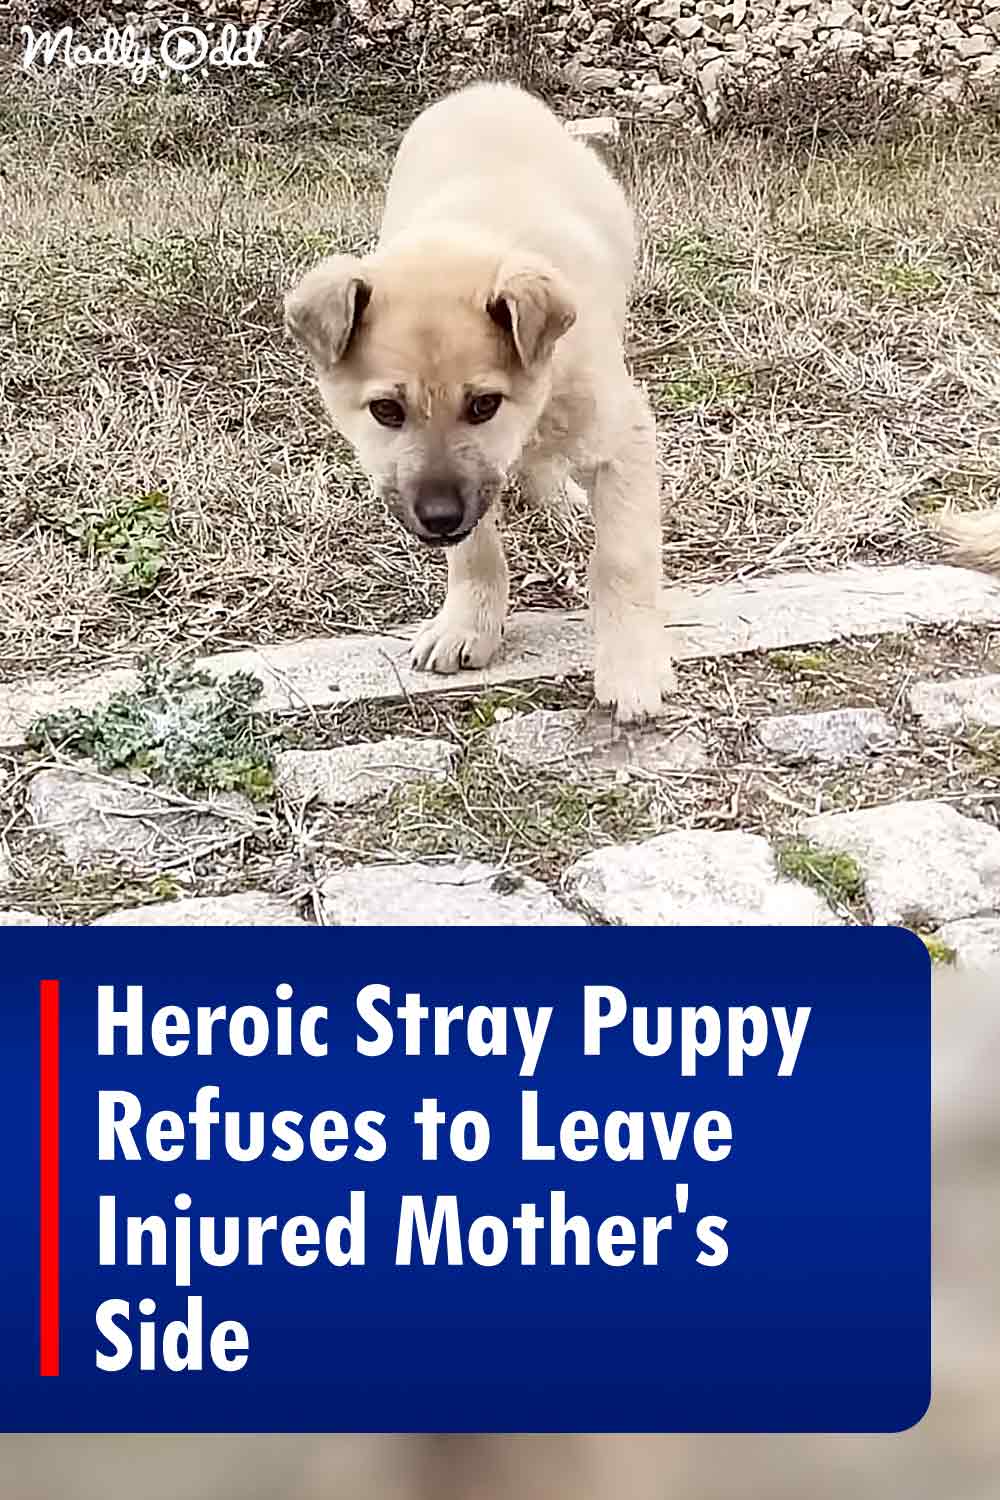 Heroic Stray Puppy Refuses to Leave Injured Mother\'s Side